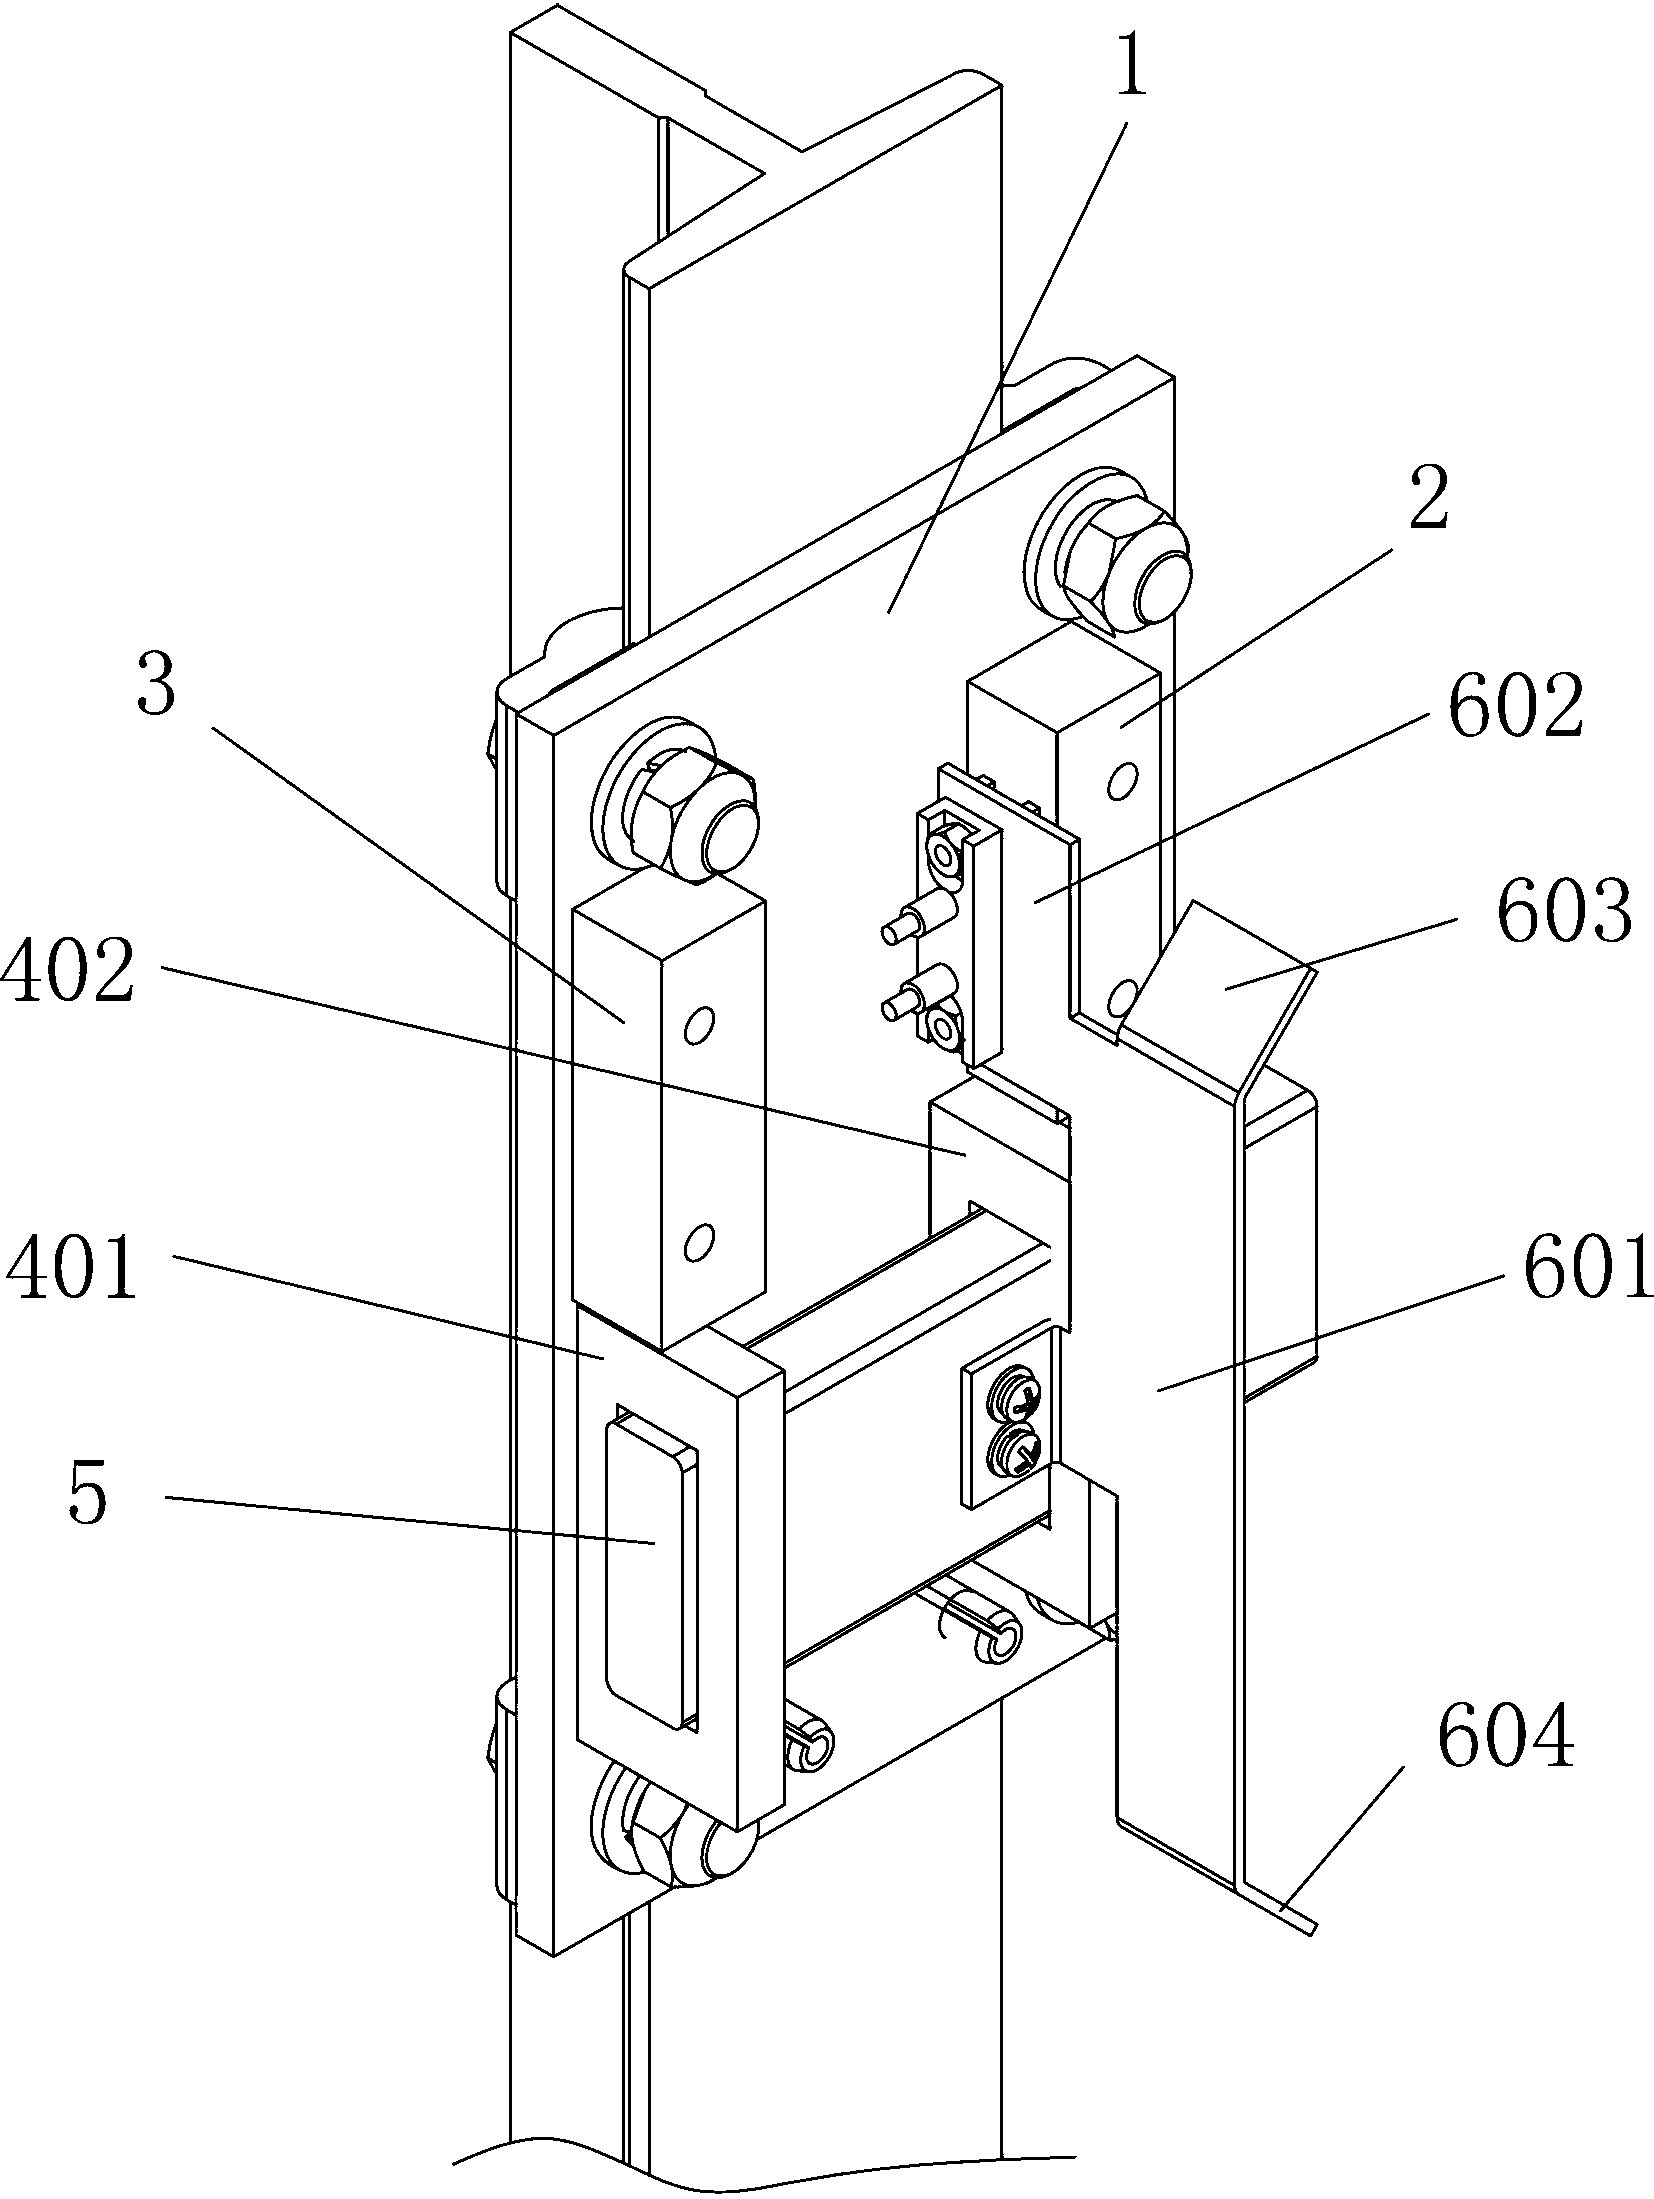 Mechanical stopping device for home elevator